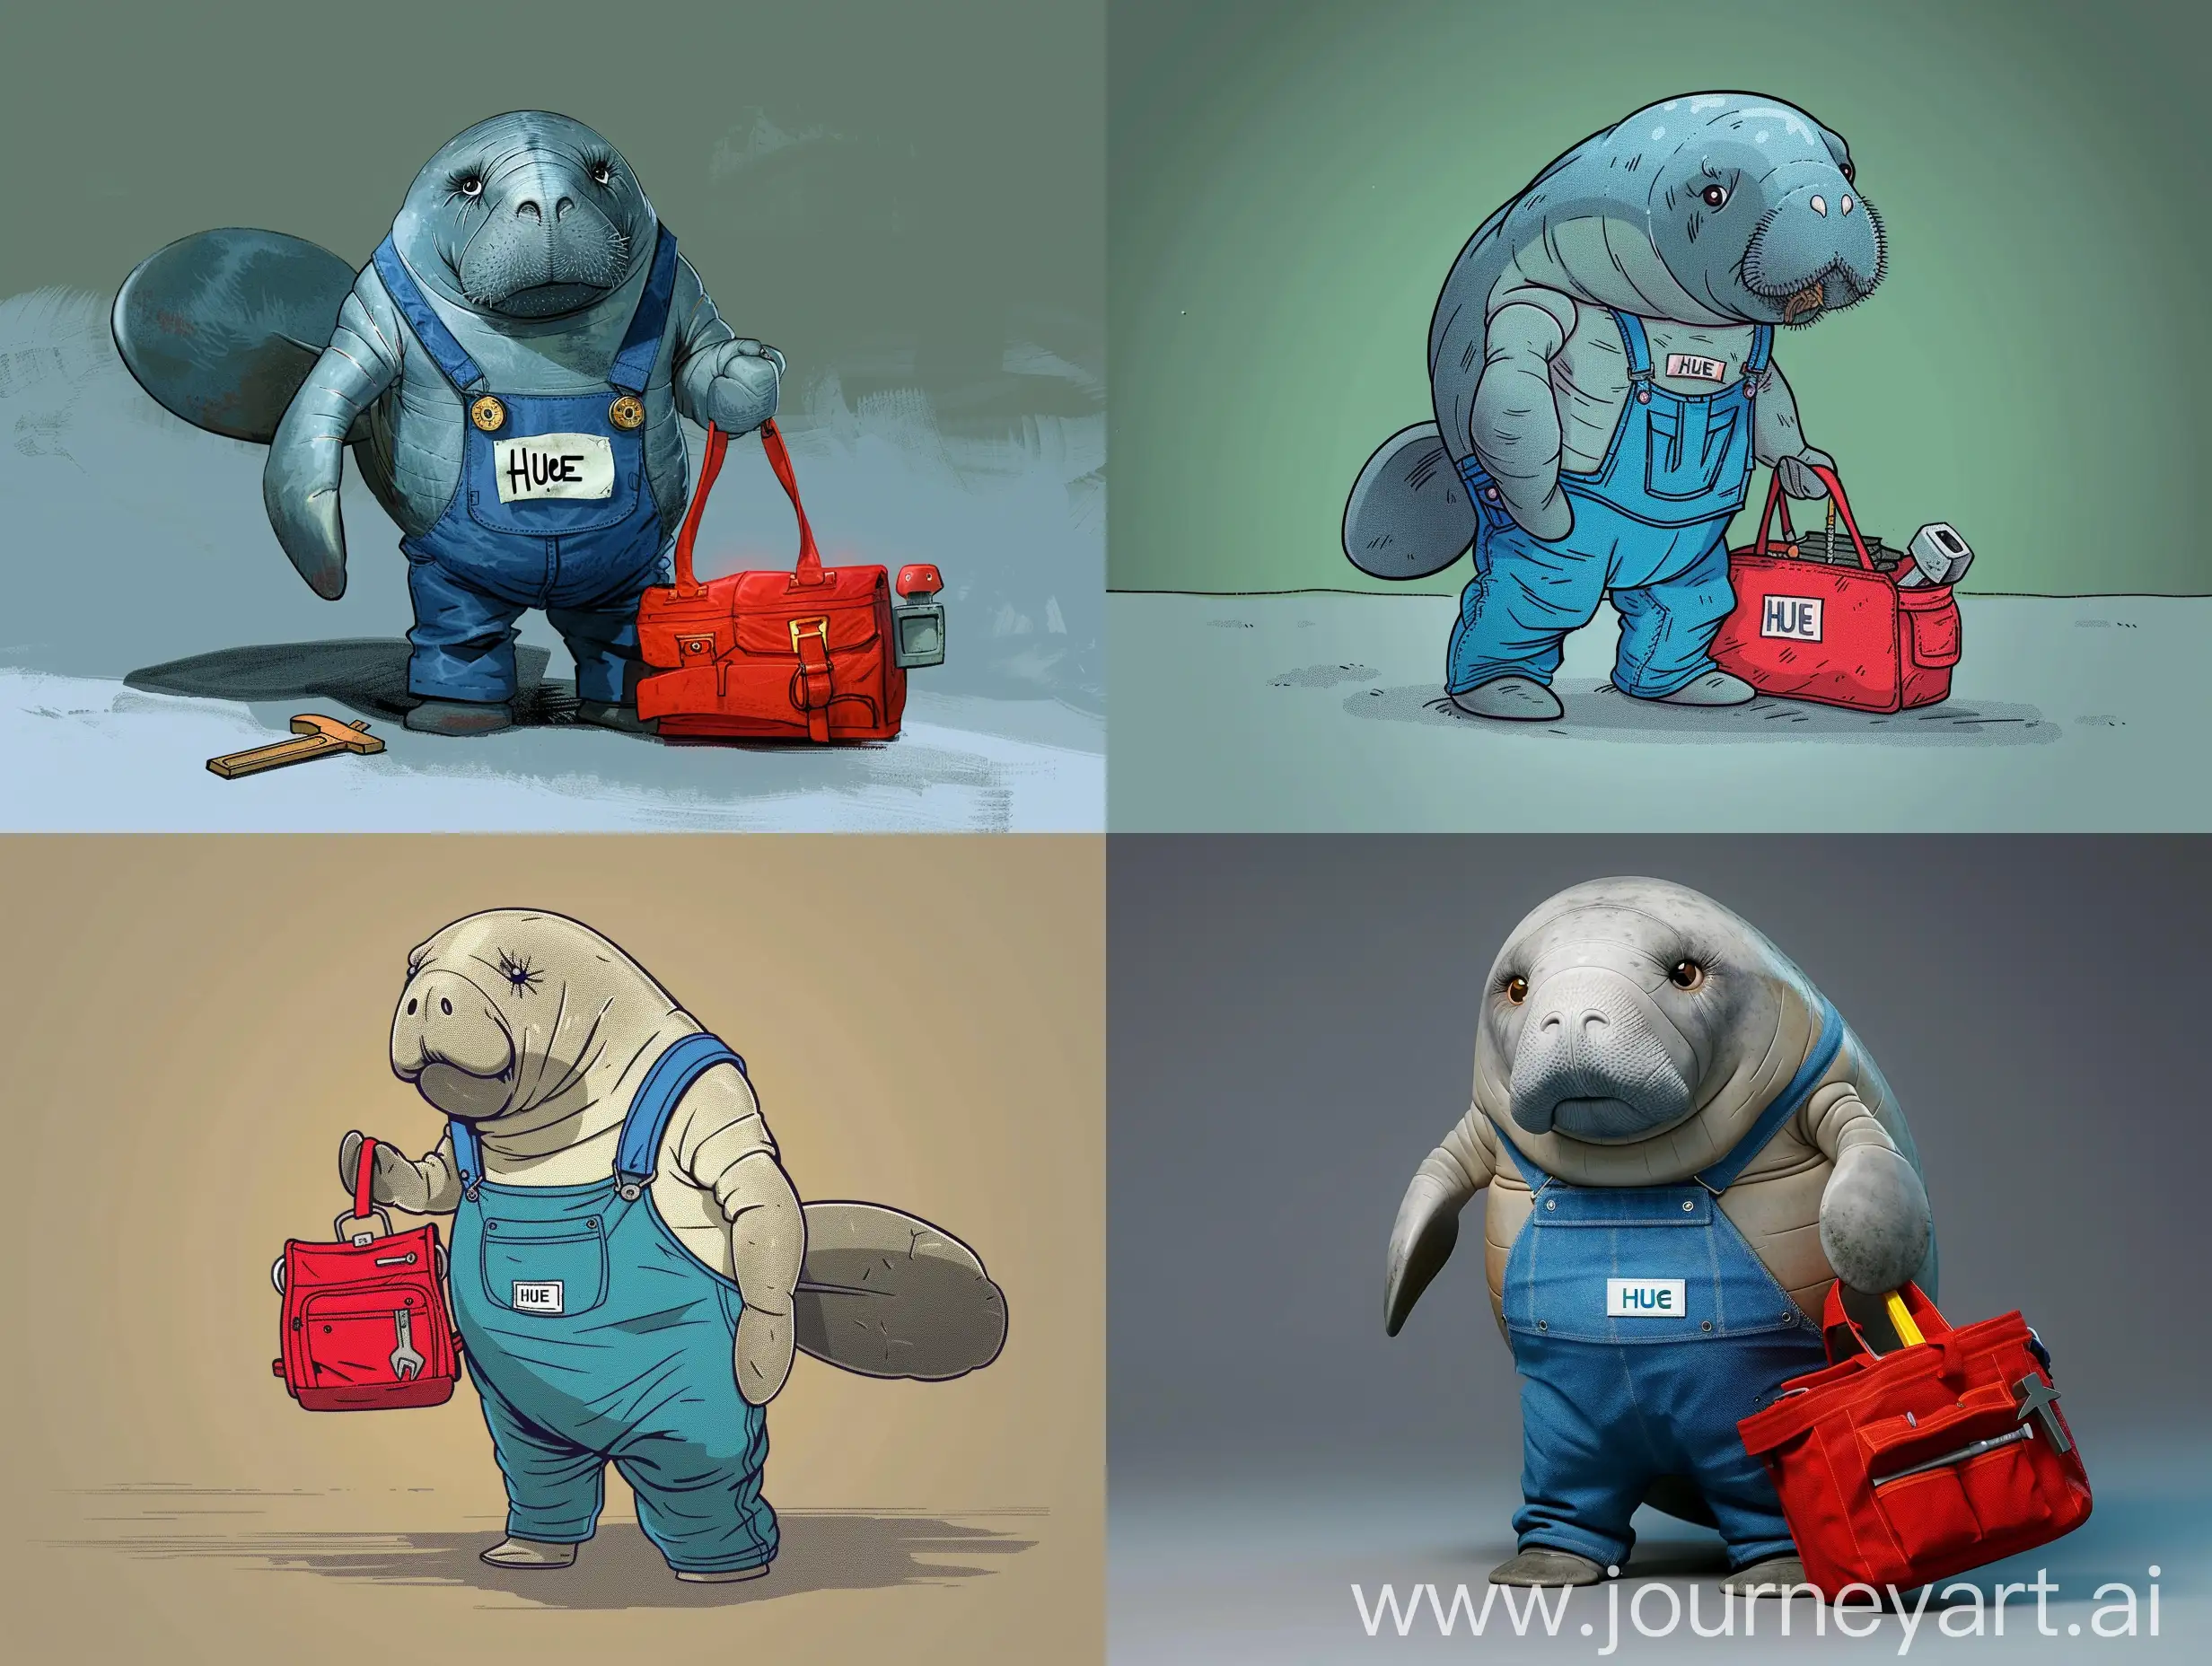 Cartoon like picture of a human like manatees in blue overalls carrying a red tool bag with Hue as his name tag